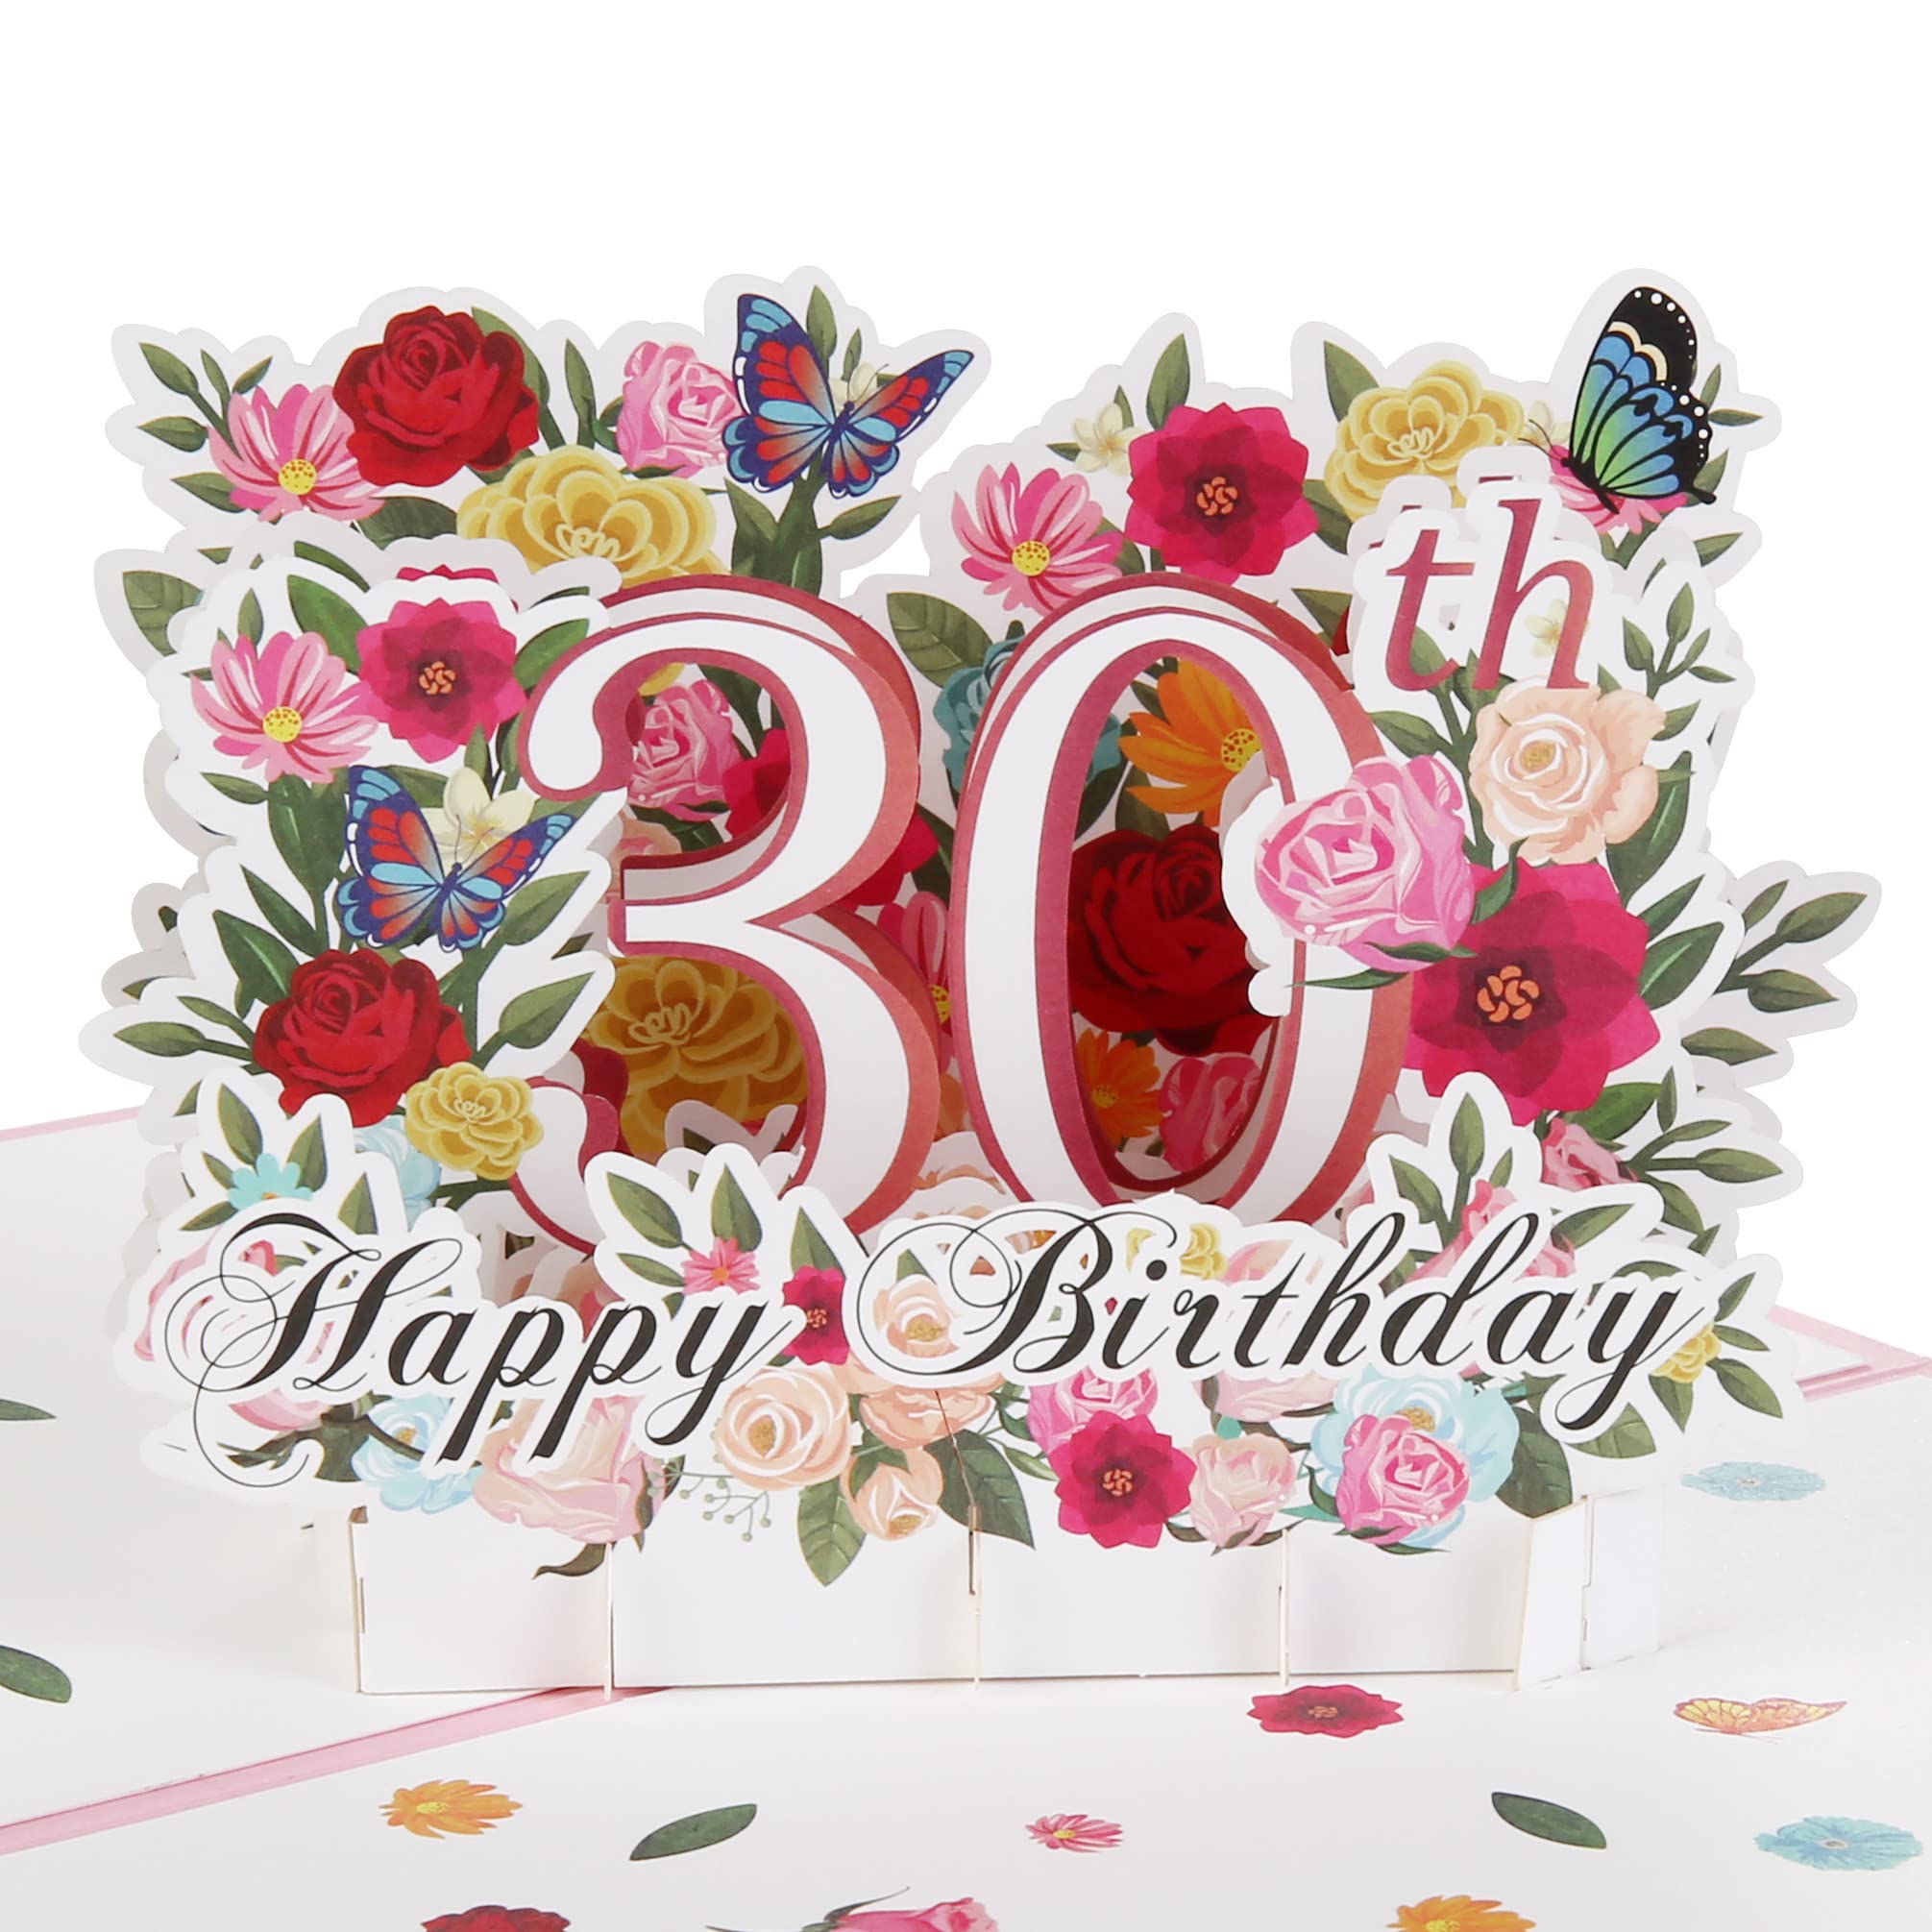 Amazon.com, HOMANGA 30th Birthday Pop Up Card, Happy 30th Birthday Card for Her, Women, Wife, 30th Birthday Gift for Sister, Mom, Friend, Pop Up Birthday Greeting Card with Blank Note and